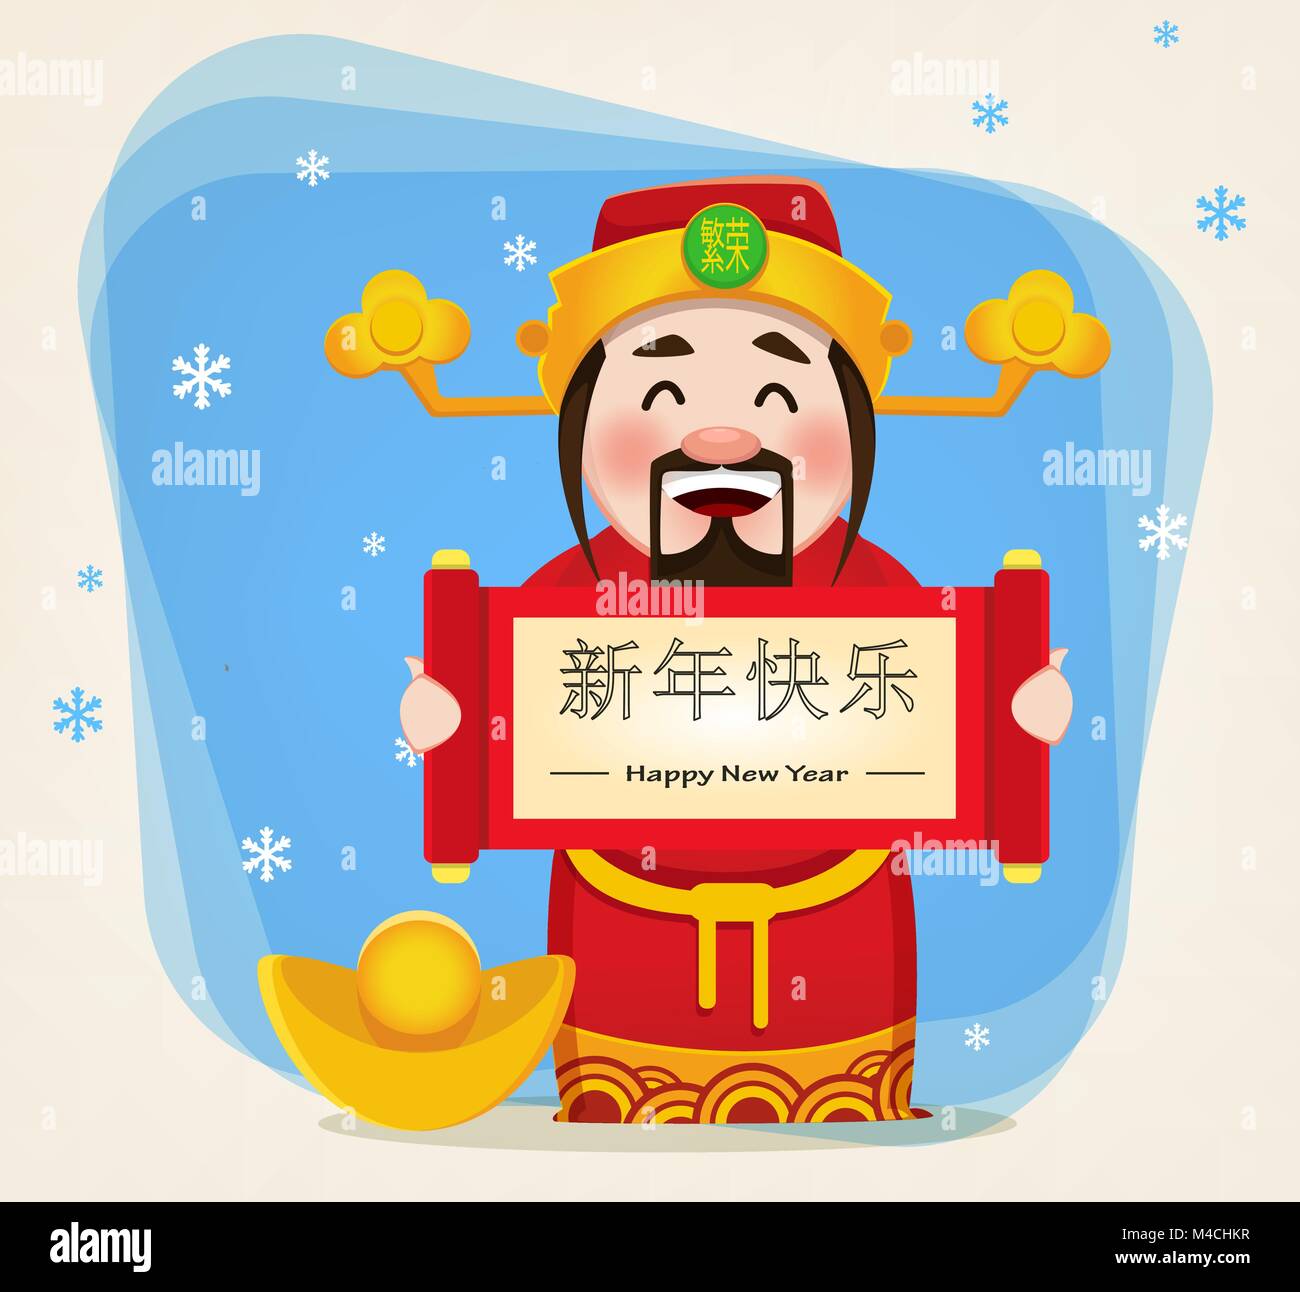 Chinese God of Wealth holding scroll with greetings. Chinese New Year 2018 greeting card. Vector illustration. Lettering translates as Happy New Year. Stock Vector